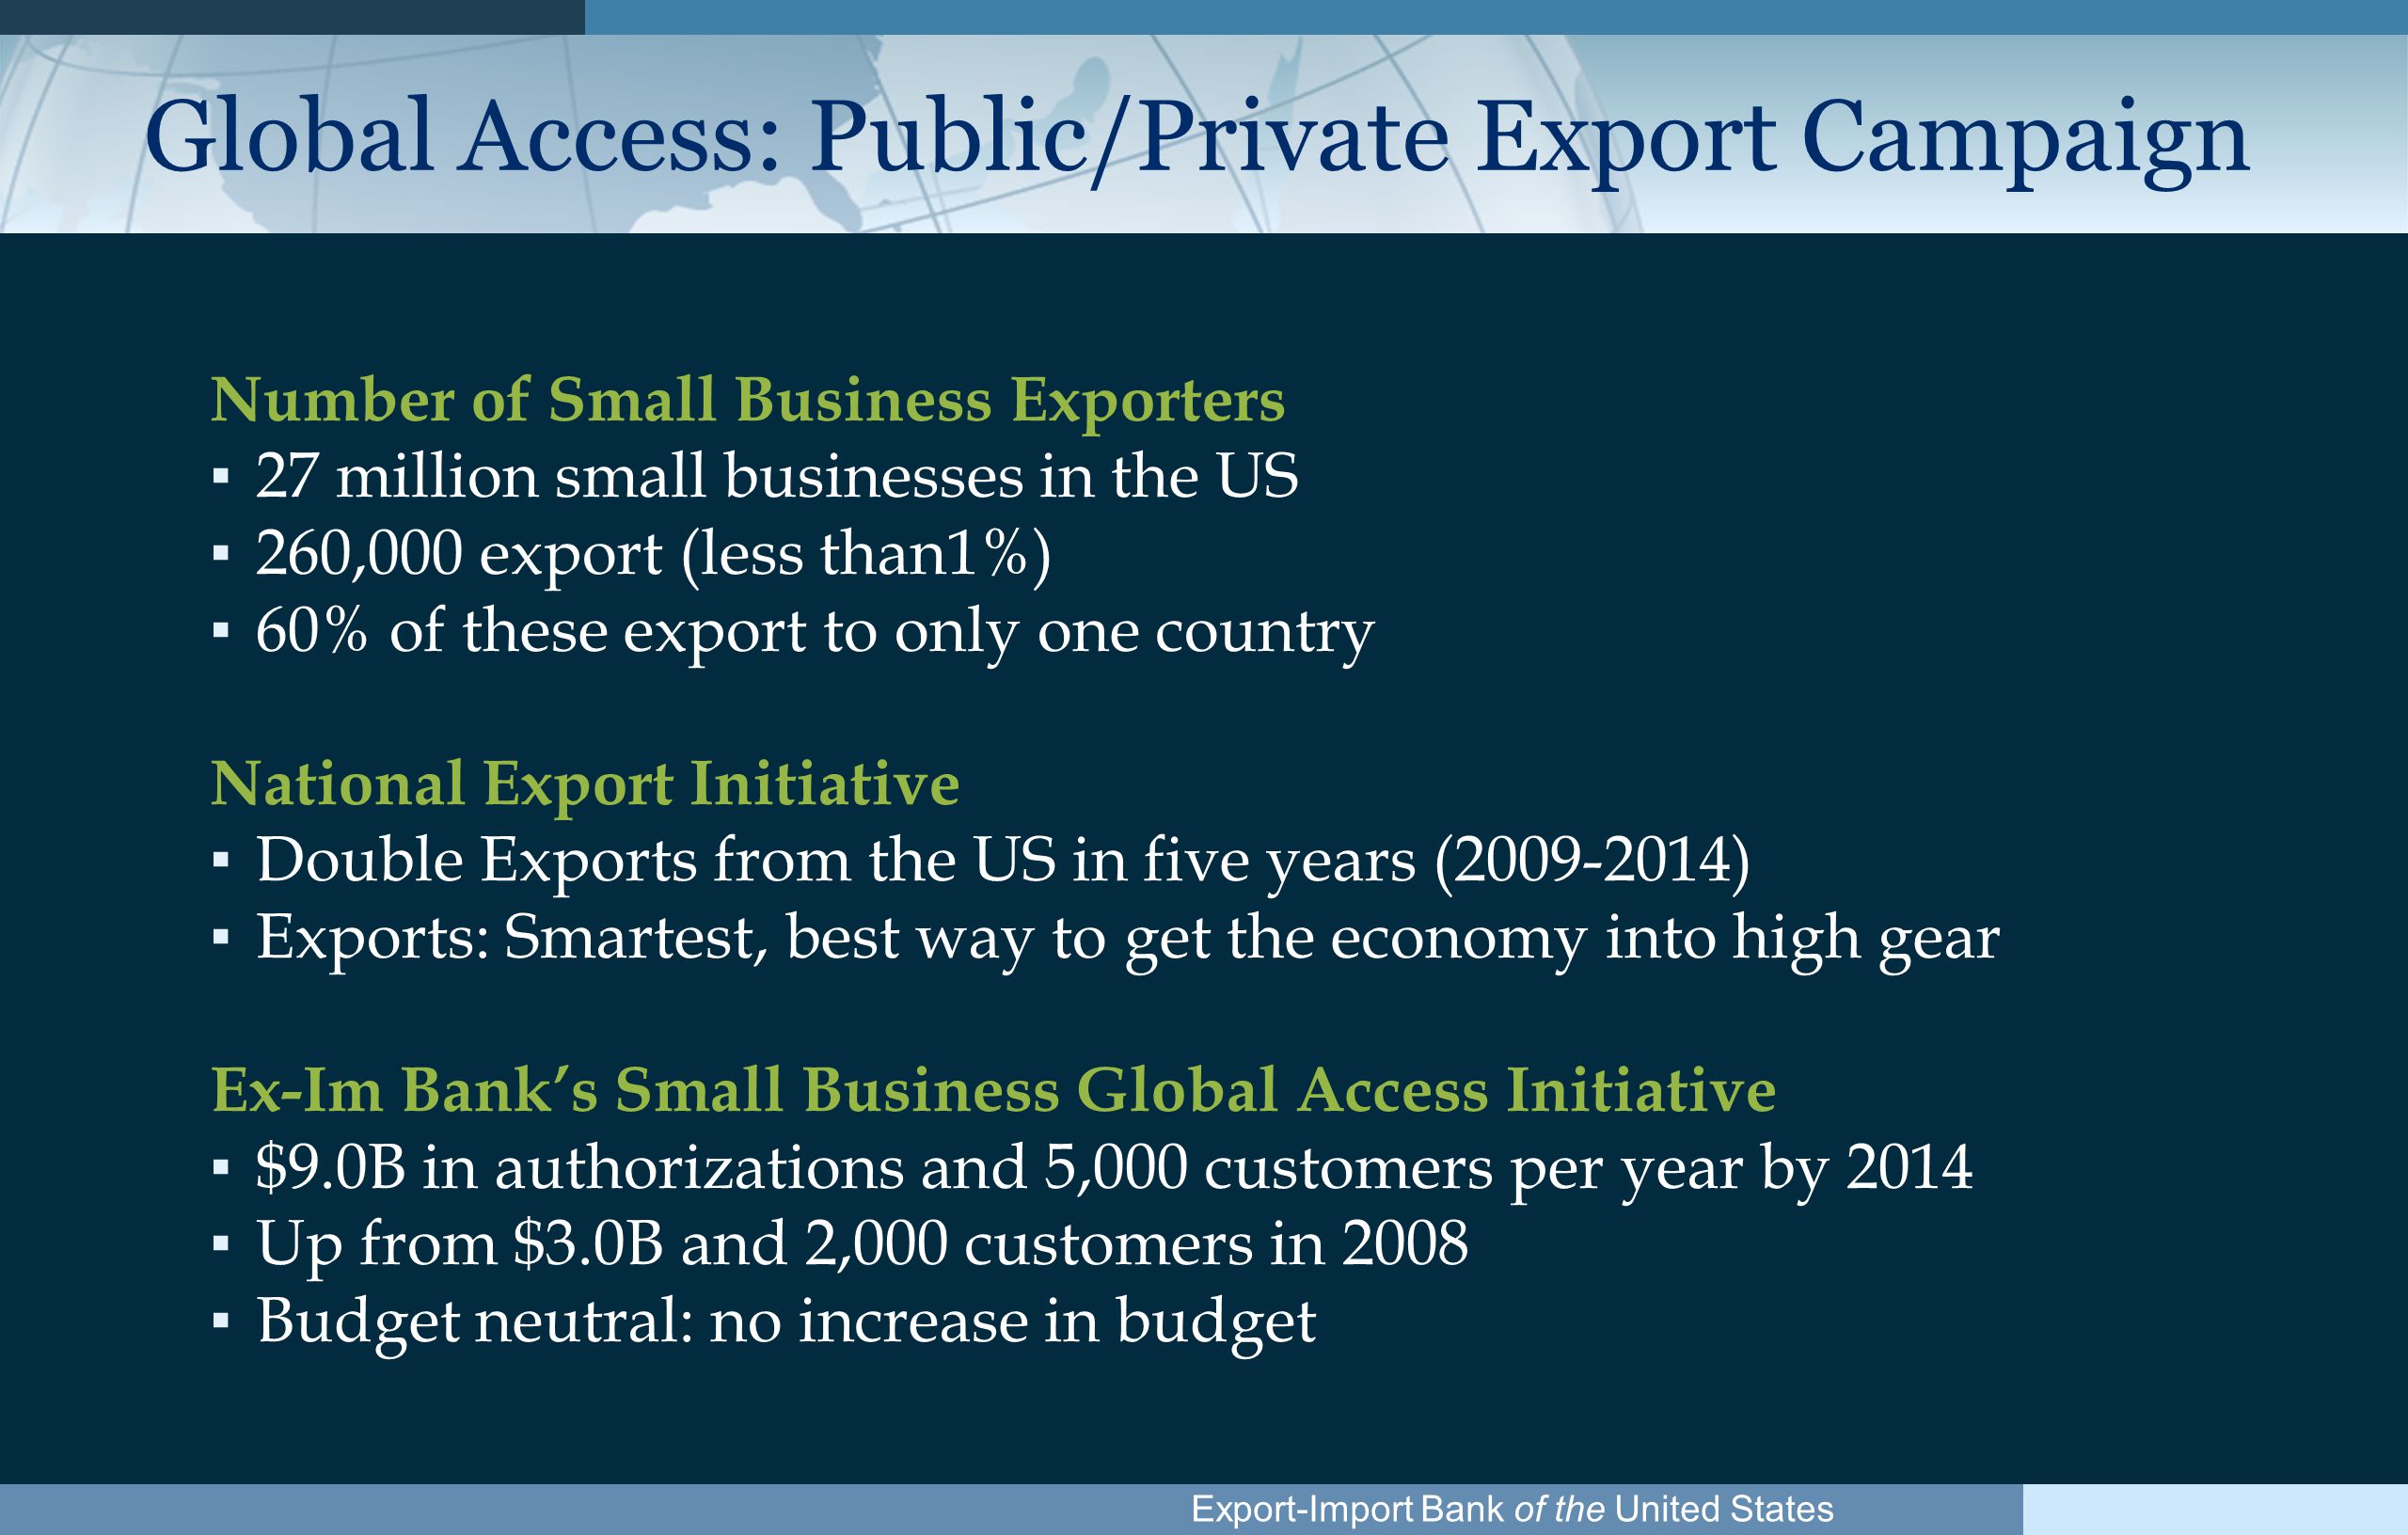 Export-Import Bank of the United States Global Access: Public/Private Export Campaign Number of Small Business Exporters ▪ 27 million small businesses in the US ▪ 260,000 export (less than1%) ▪ 60% of these export to only one country National Export Initiative ▪ Double Exports from the US in five years ( ) ▪ Exports: Smartest, best way to get the economy into high gear Ex-Im Bank’s Small Business Global Access Initiative ▪ $9.0B in authorizations and 5,000 customers per year by 2014 ▪ Up from $3.0B and 2,000 customers in 2008 ▪ Budget neutral: no increase in budget